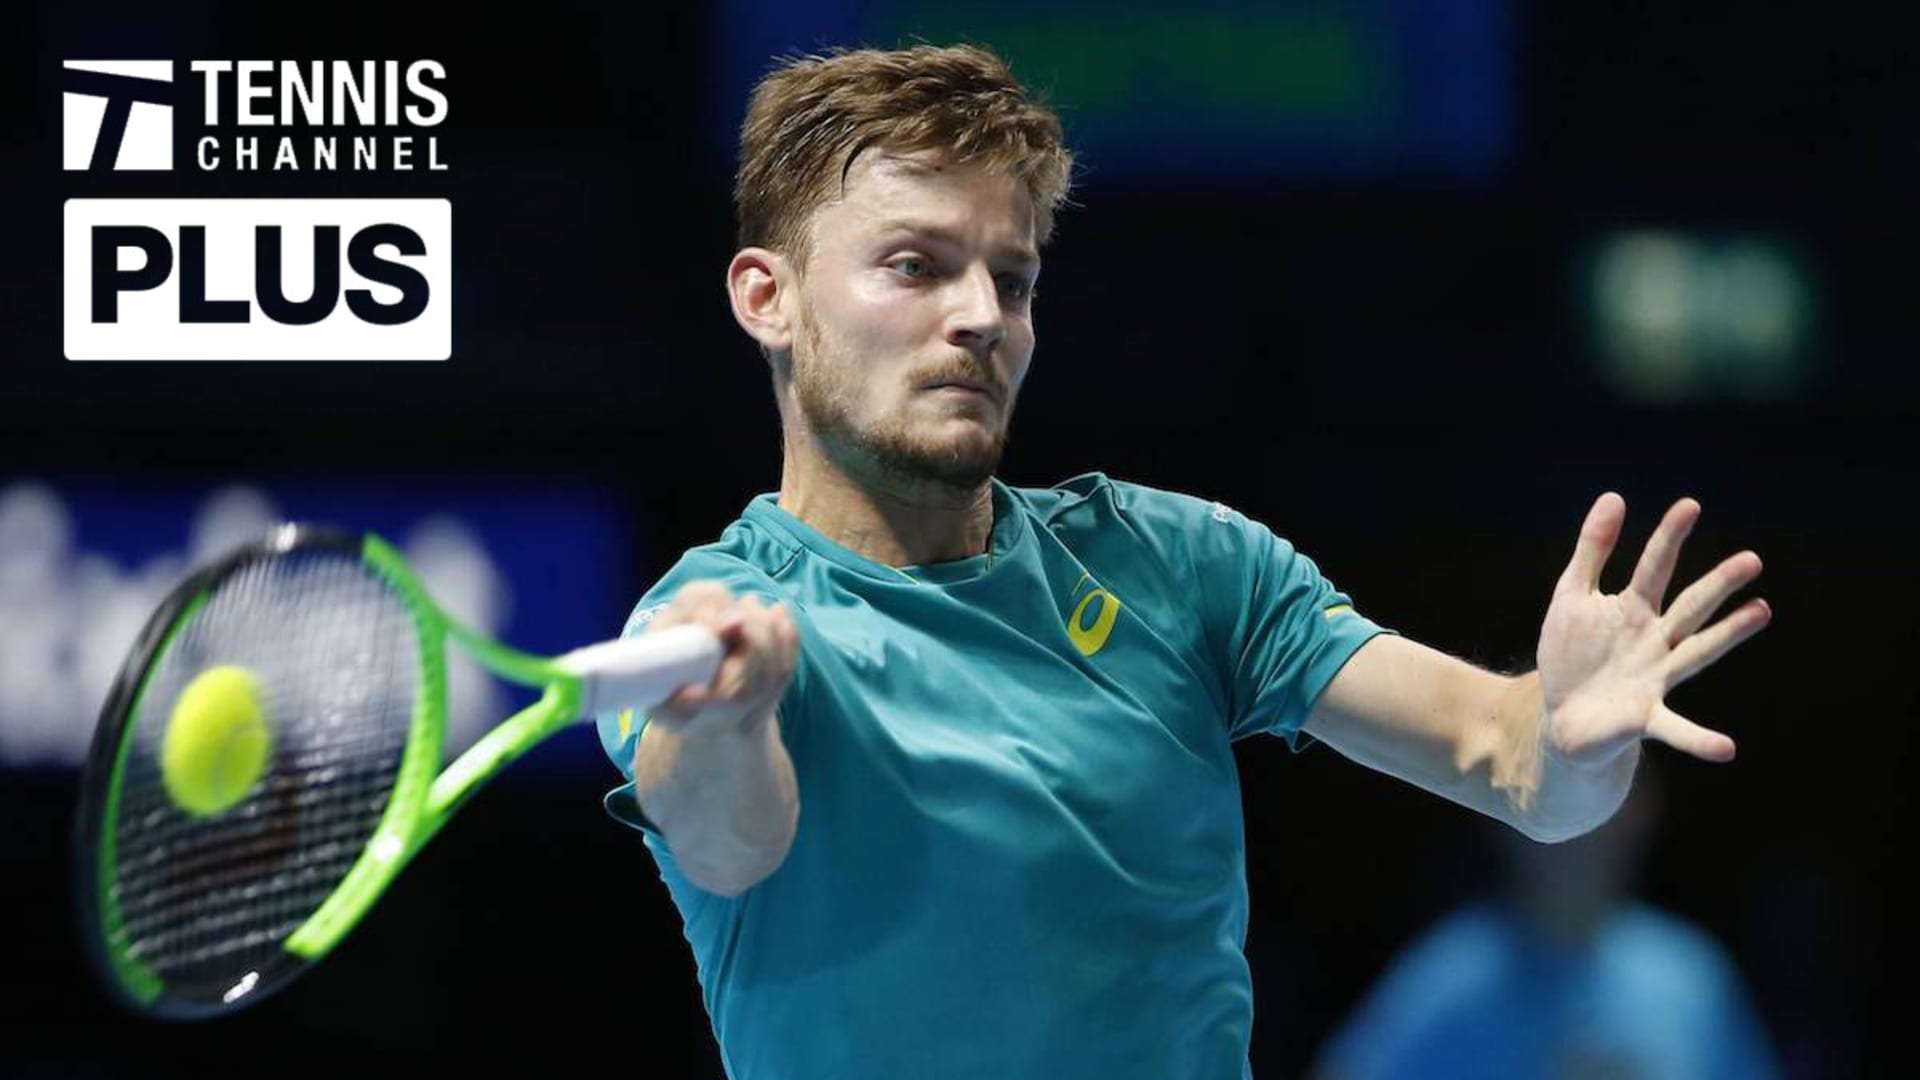 TC Plus Match of the Day David Goffin vs